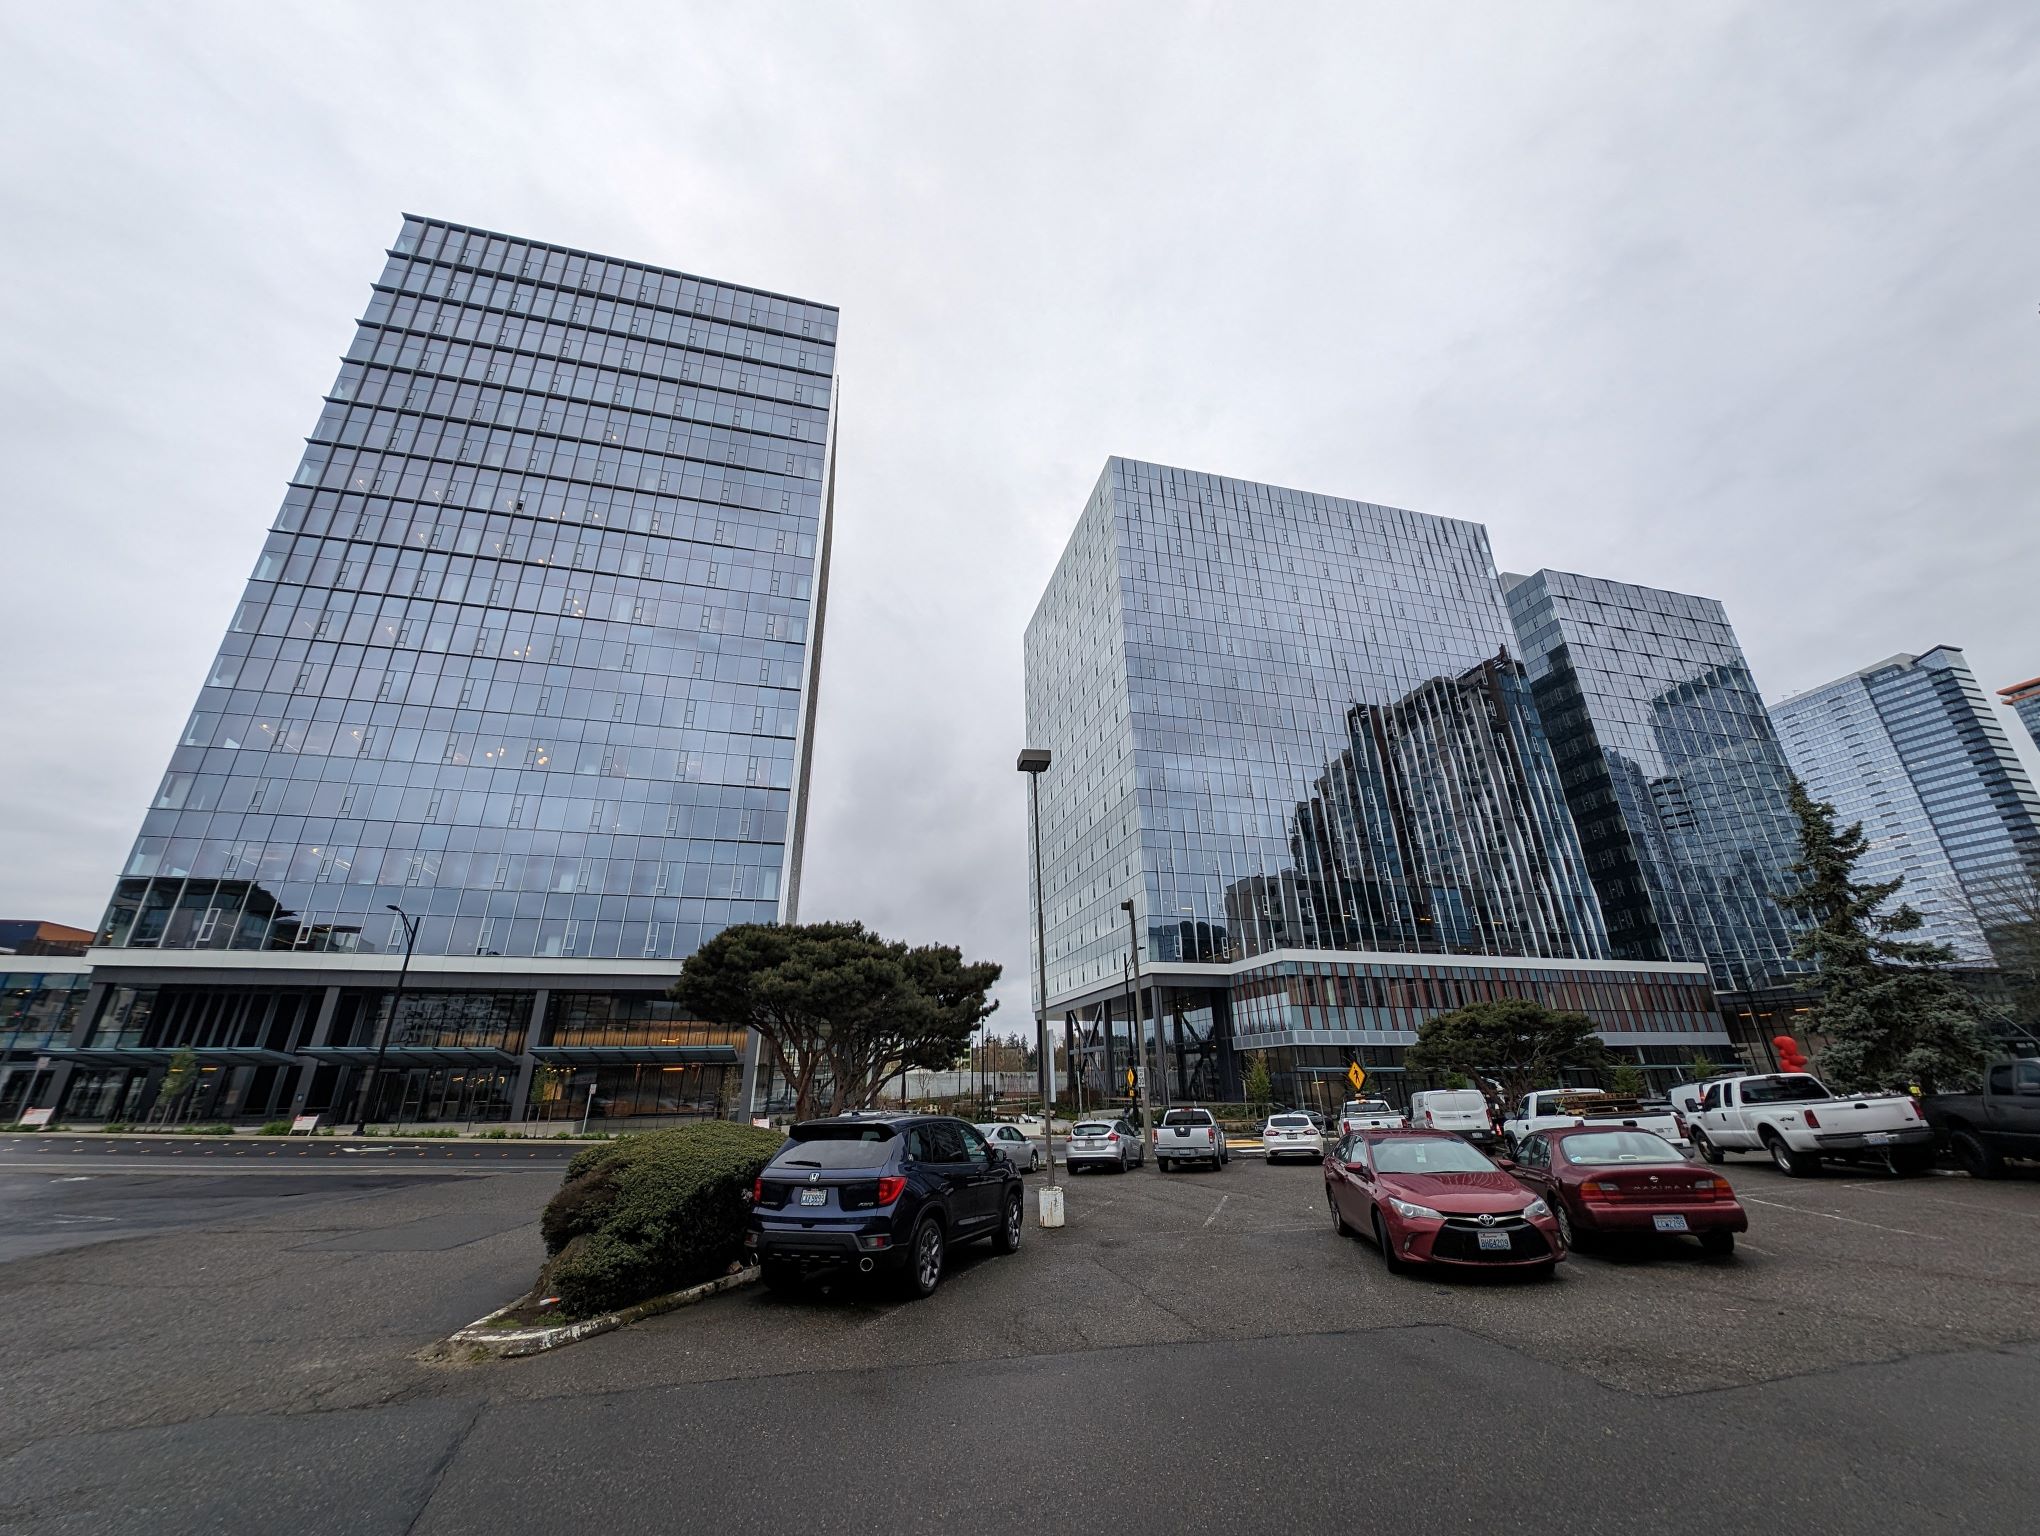 Two shiny glass tower boxes with parking lot in foreground.